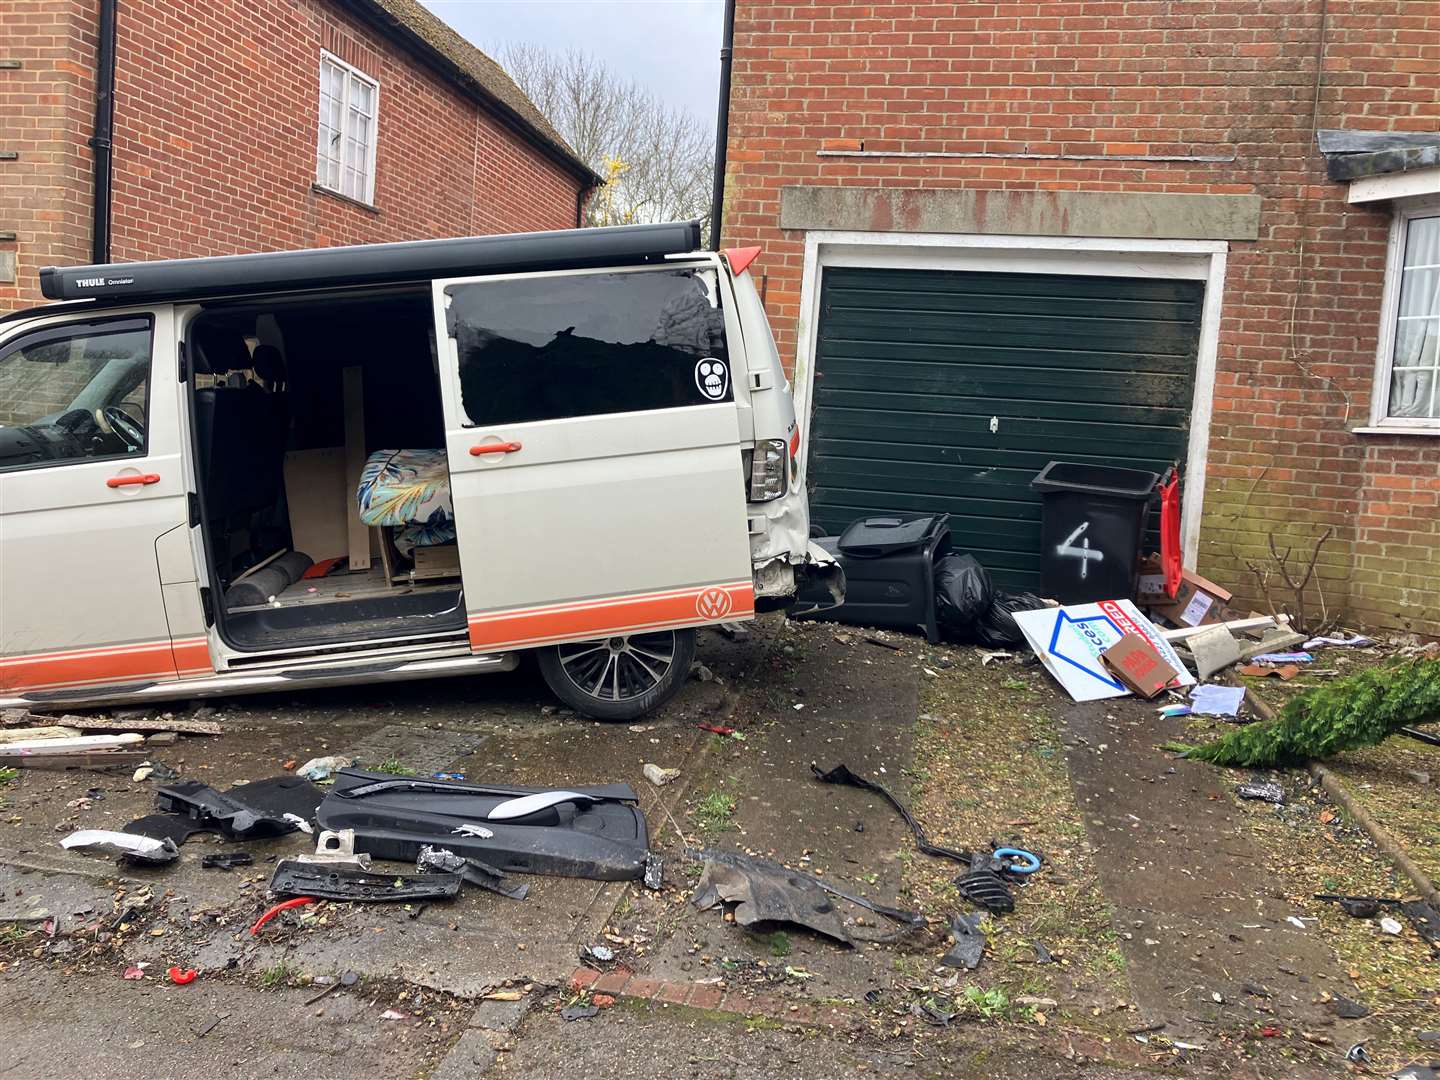 The family's van was one of the parked vehicles damaged in the crash